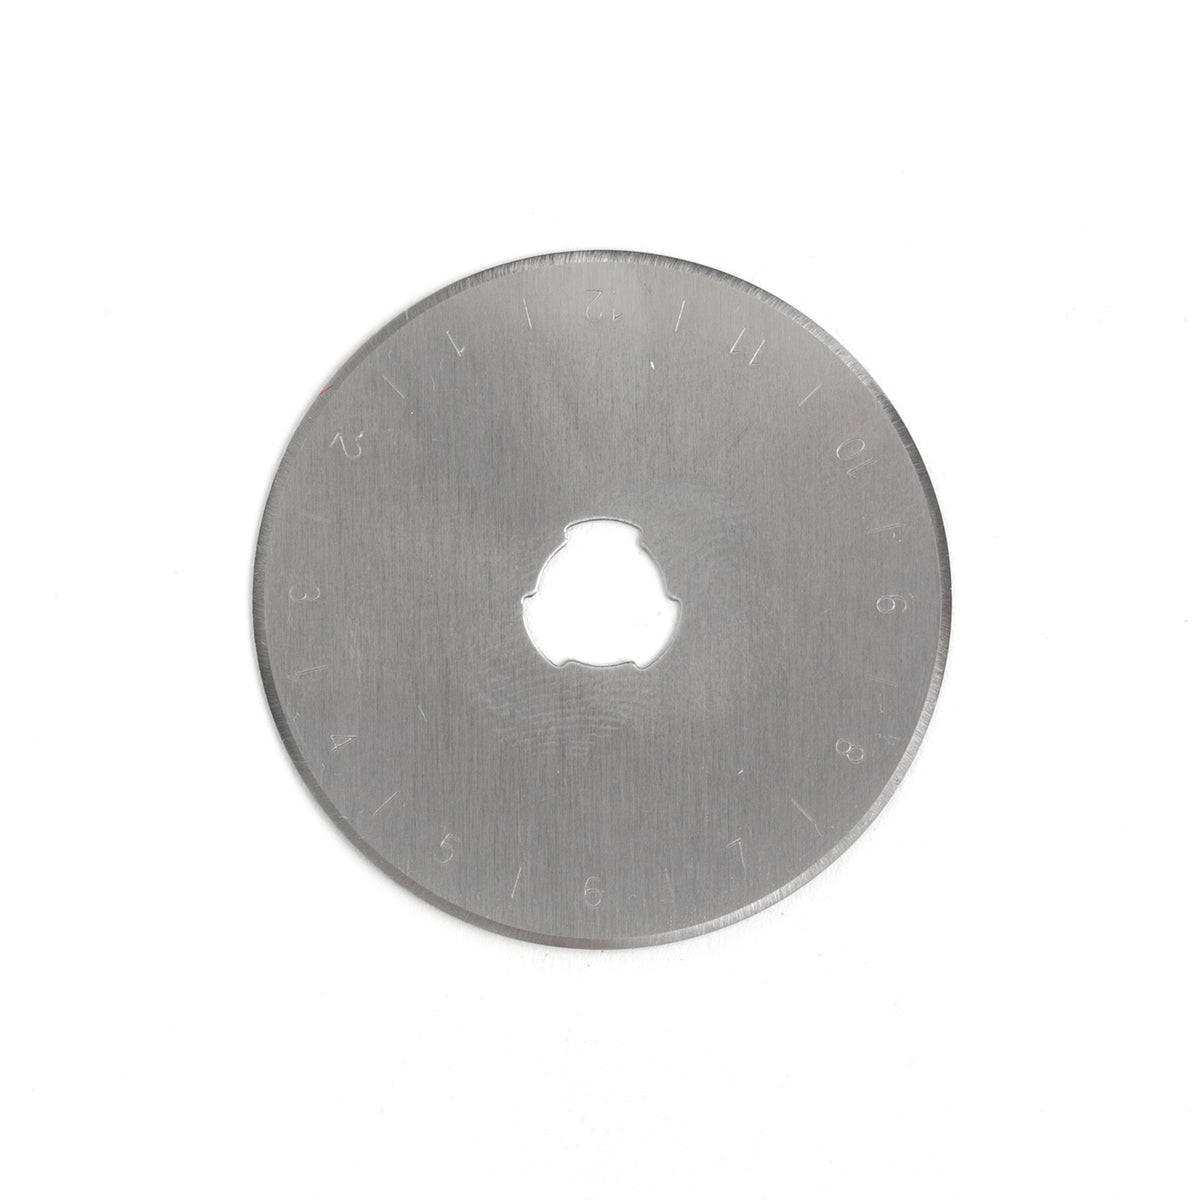 Sonora Slotted Conchos Frosted Nickel Plate - 6 Pack Small from Tandy Leather